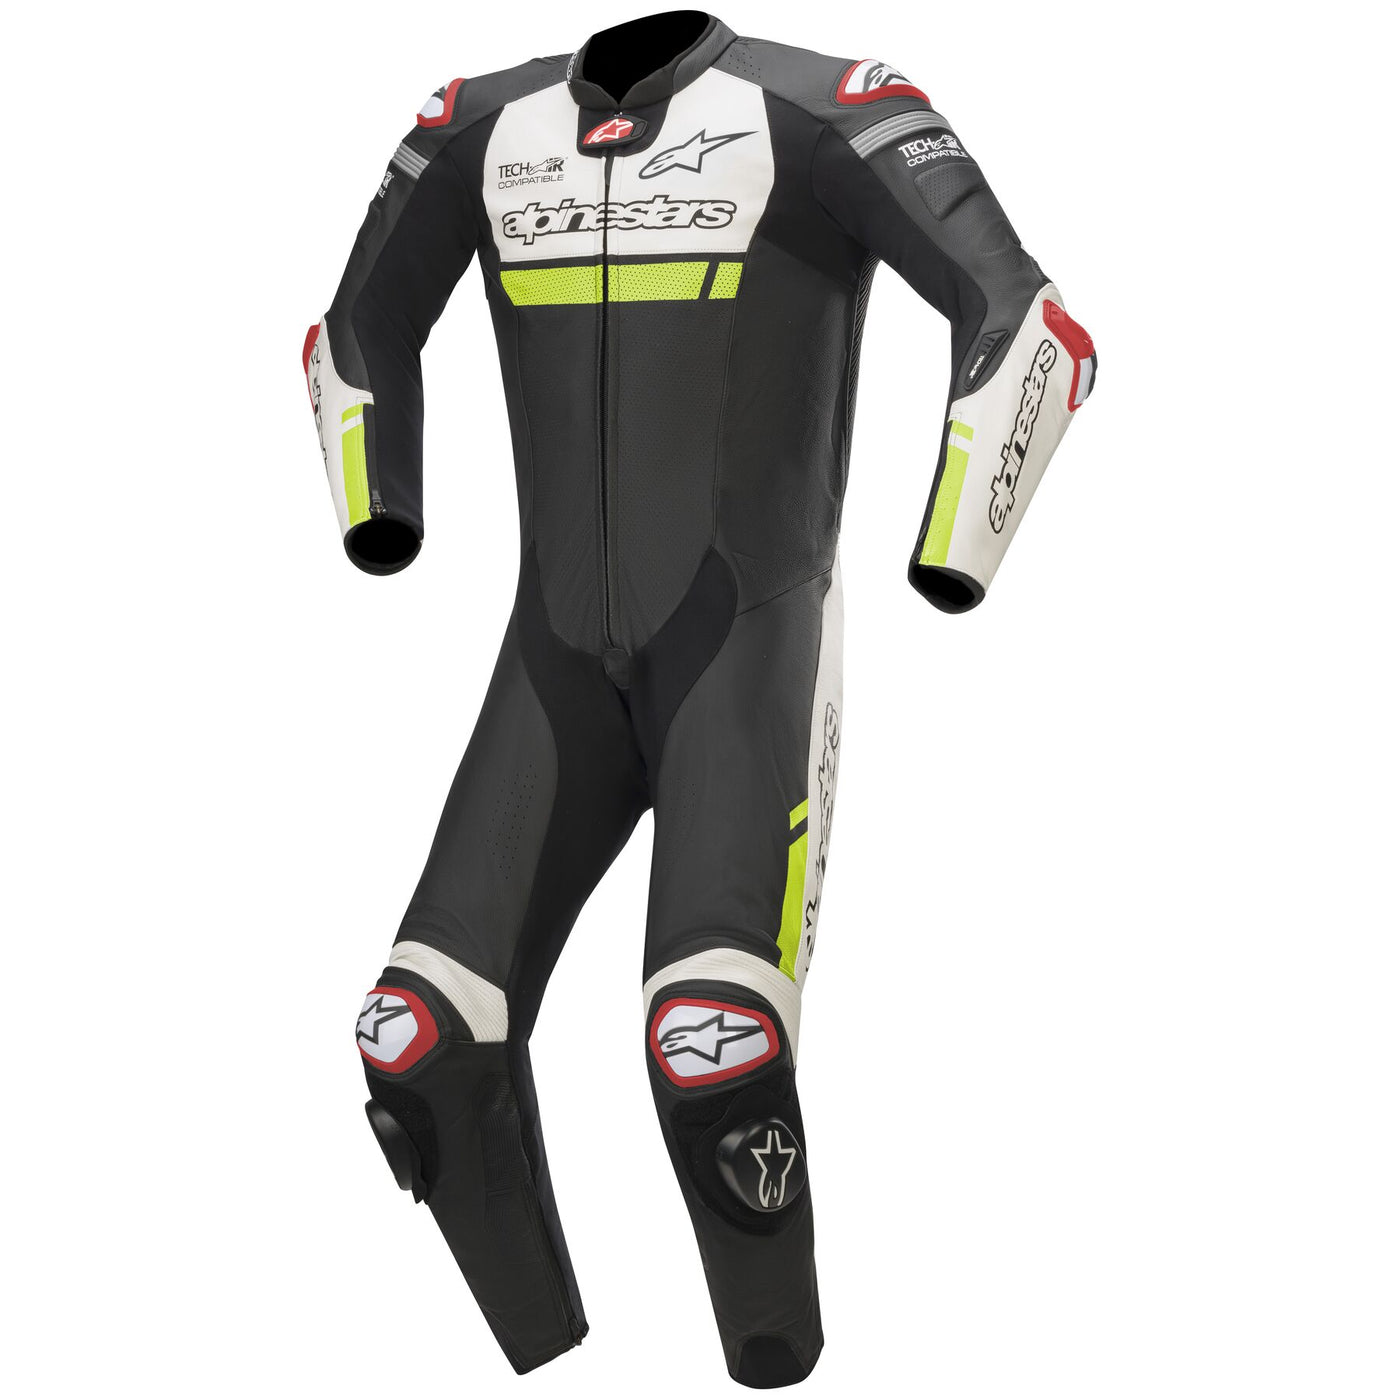 ALPINESTARS MISSILE IGNITION Motorbike Racing Suit Leather Made - ZEES MOTOR SPORTS